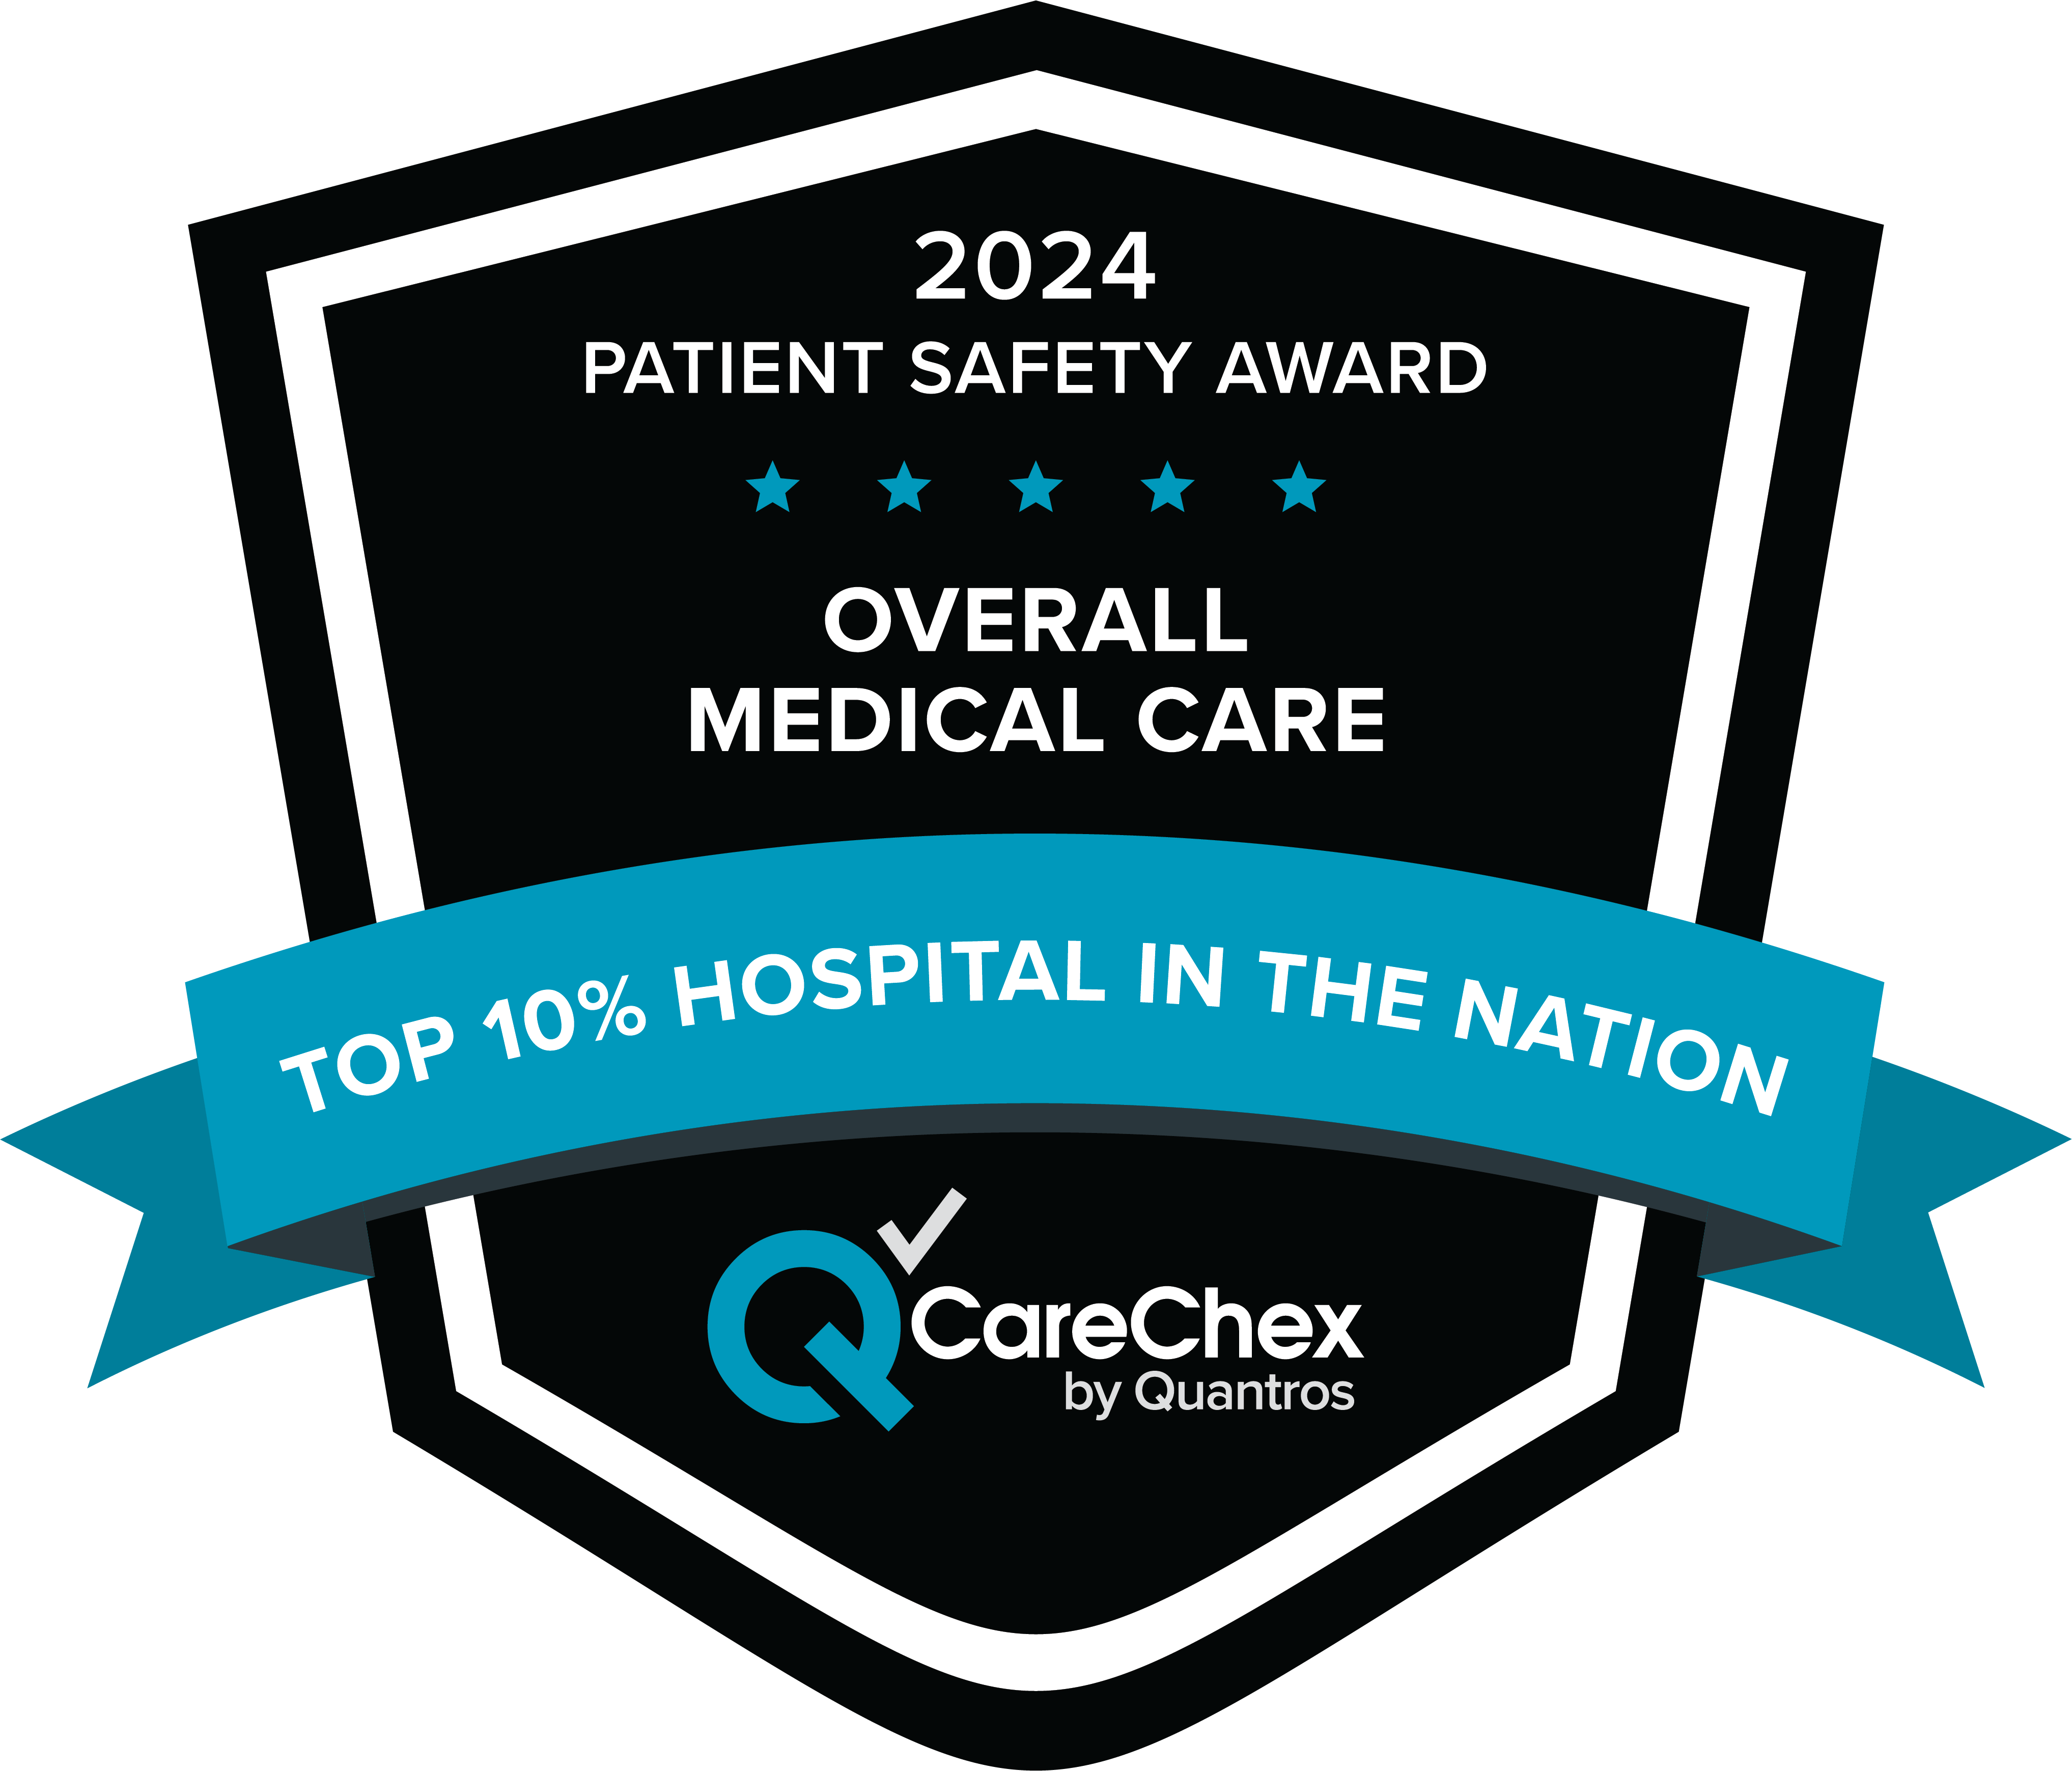 Awards badge for Top 10% Hospital in the Nation for Patient Safety in Overall Medical Care at Johnston Memorial Hospital - 2024 CareChex by Quantros